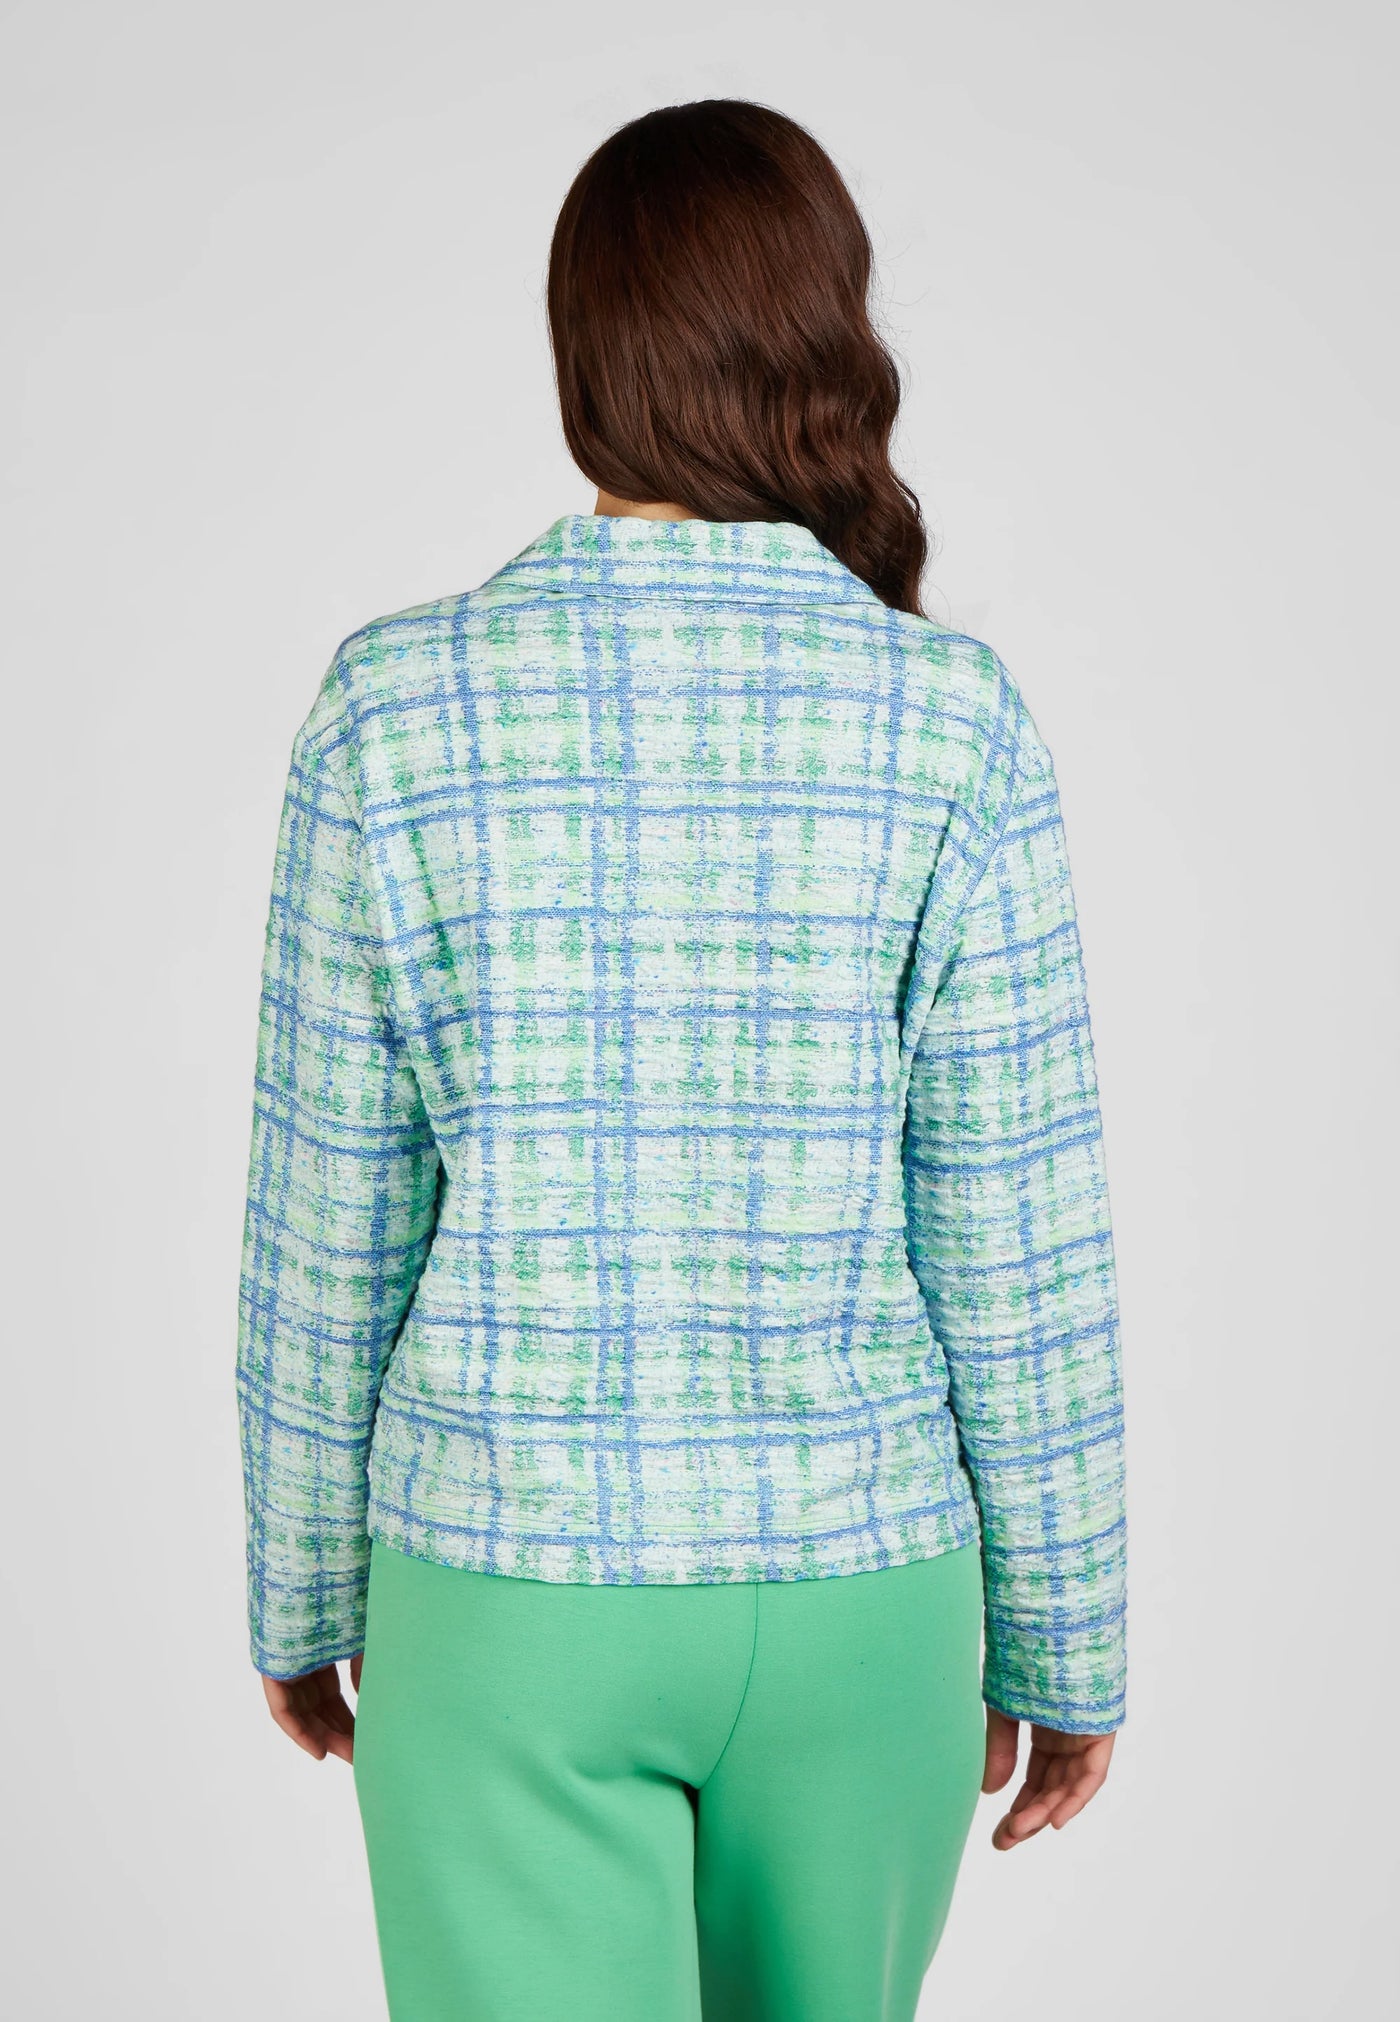 Blue And Green Jacket With Buttons